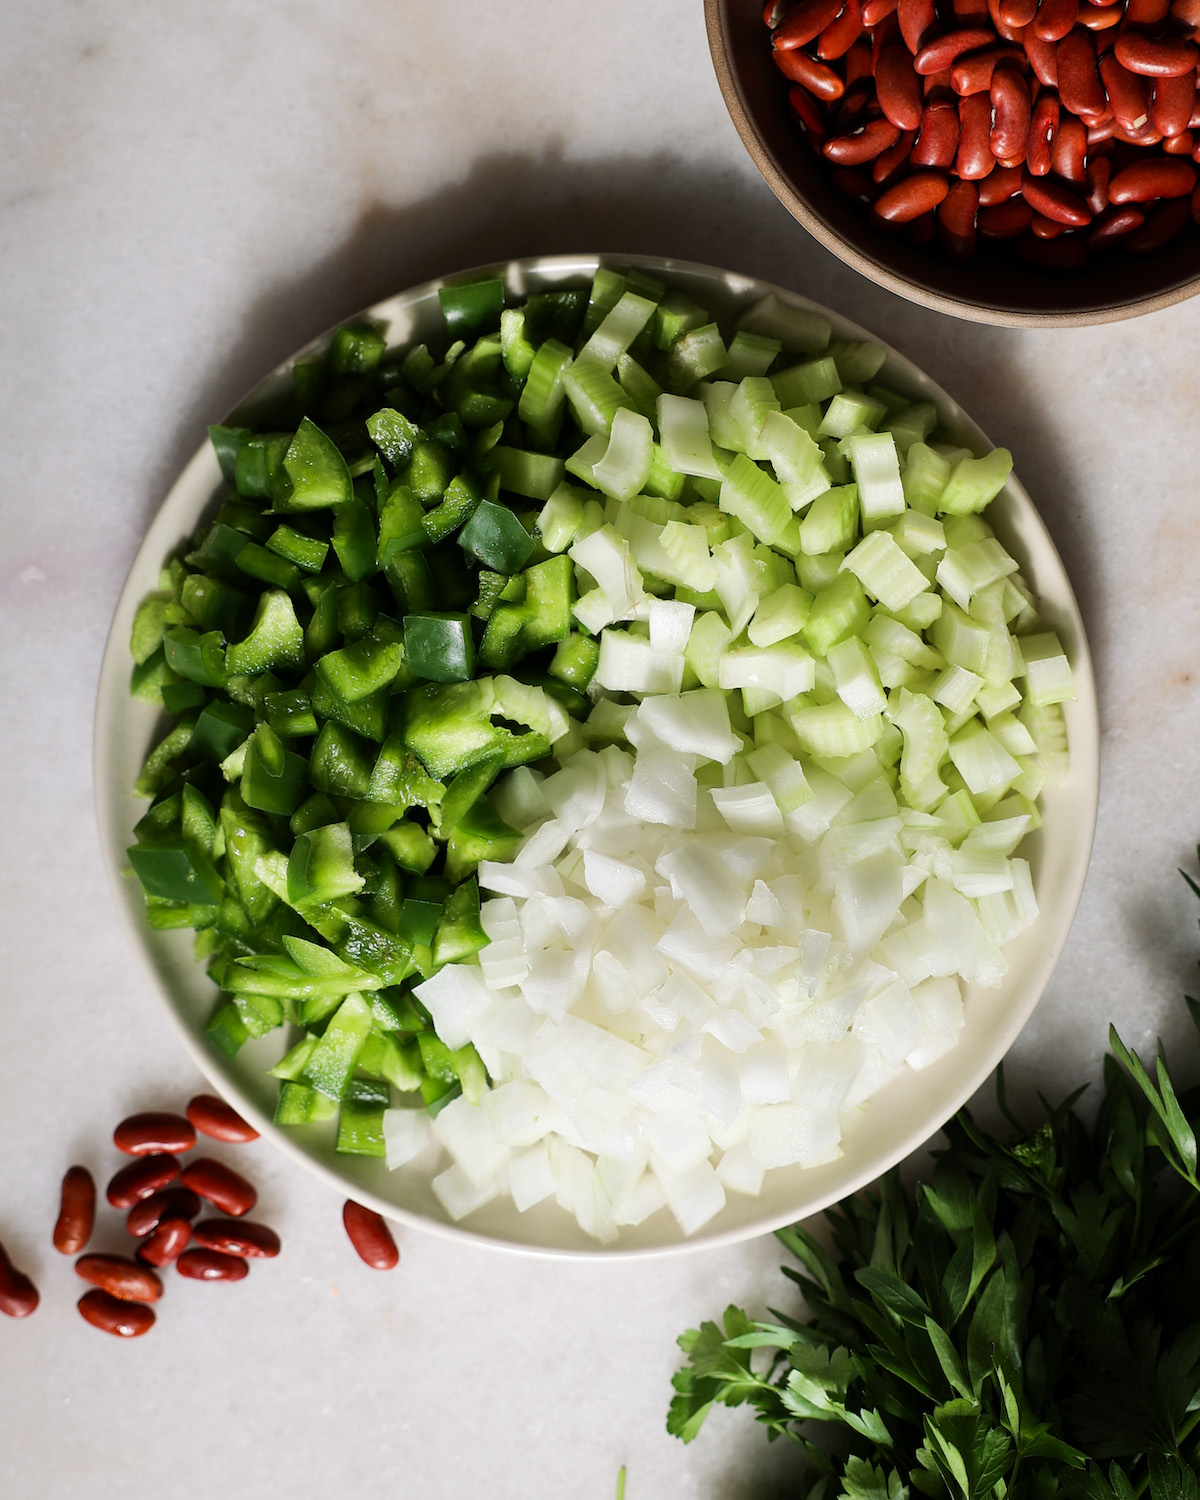 onions, celery, and green pepper on a plate